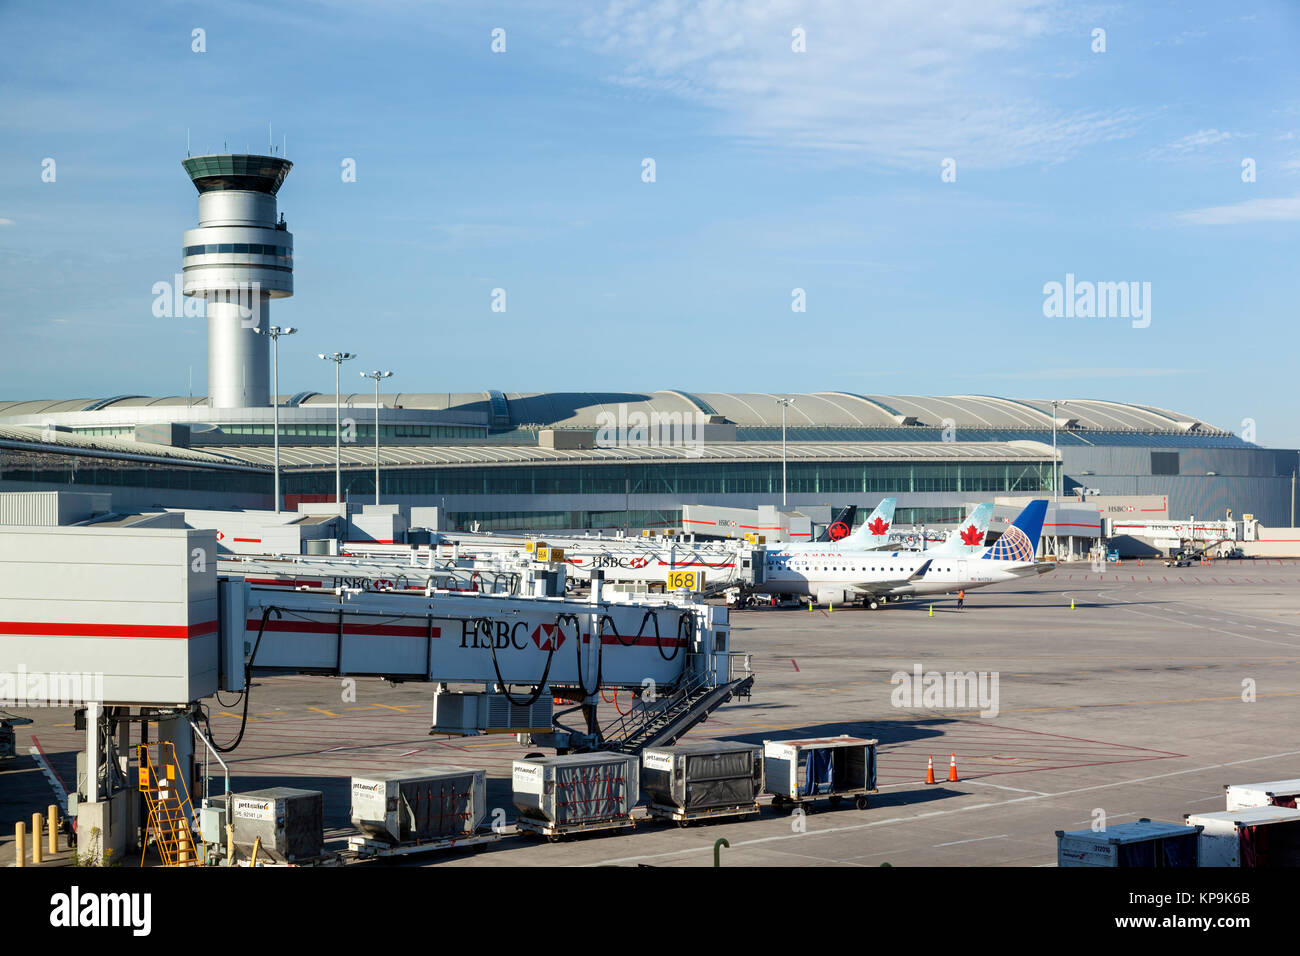 Toronto, Canada - Oct 22, 2017: Air Canada and rouge airplanes at the Toronto Pearson International Airport, Canada Stock Photo